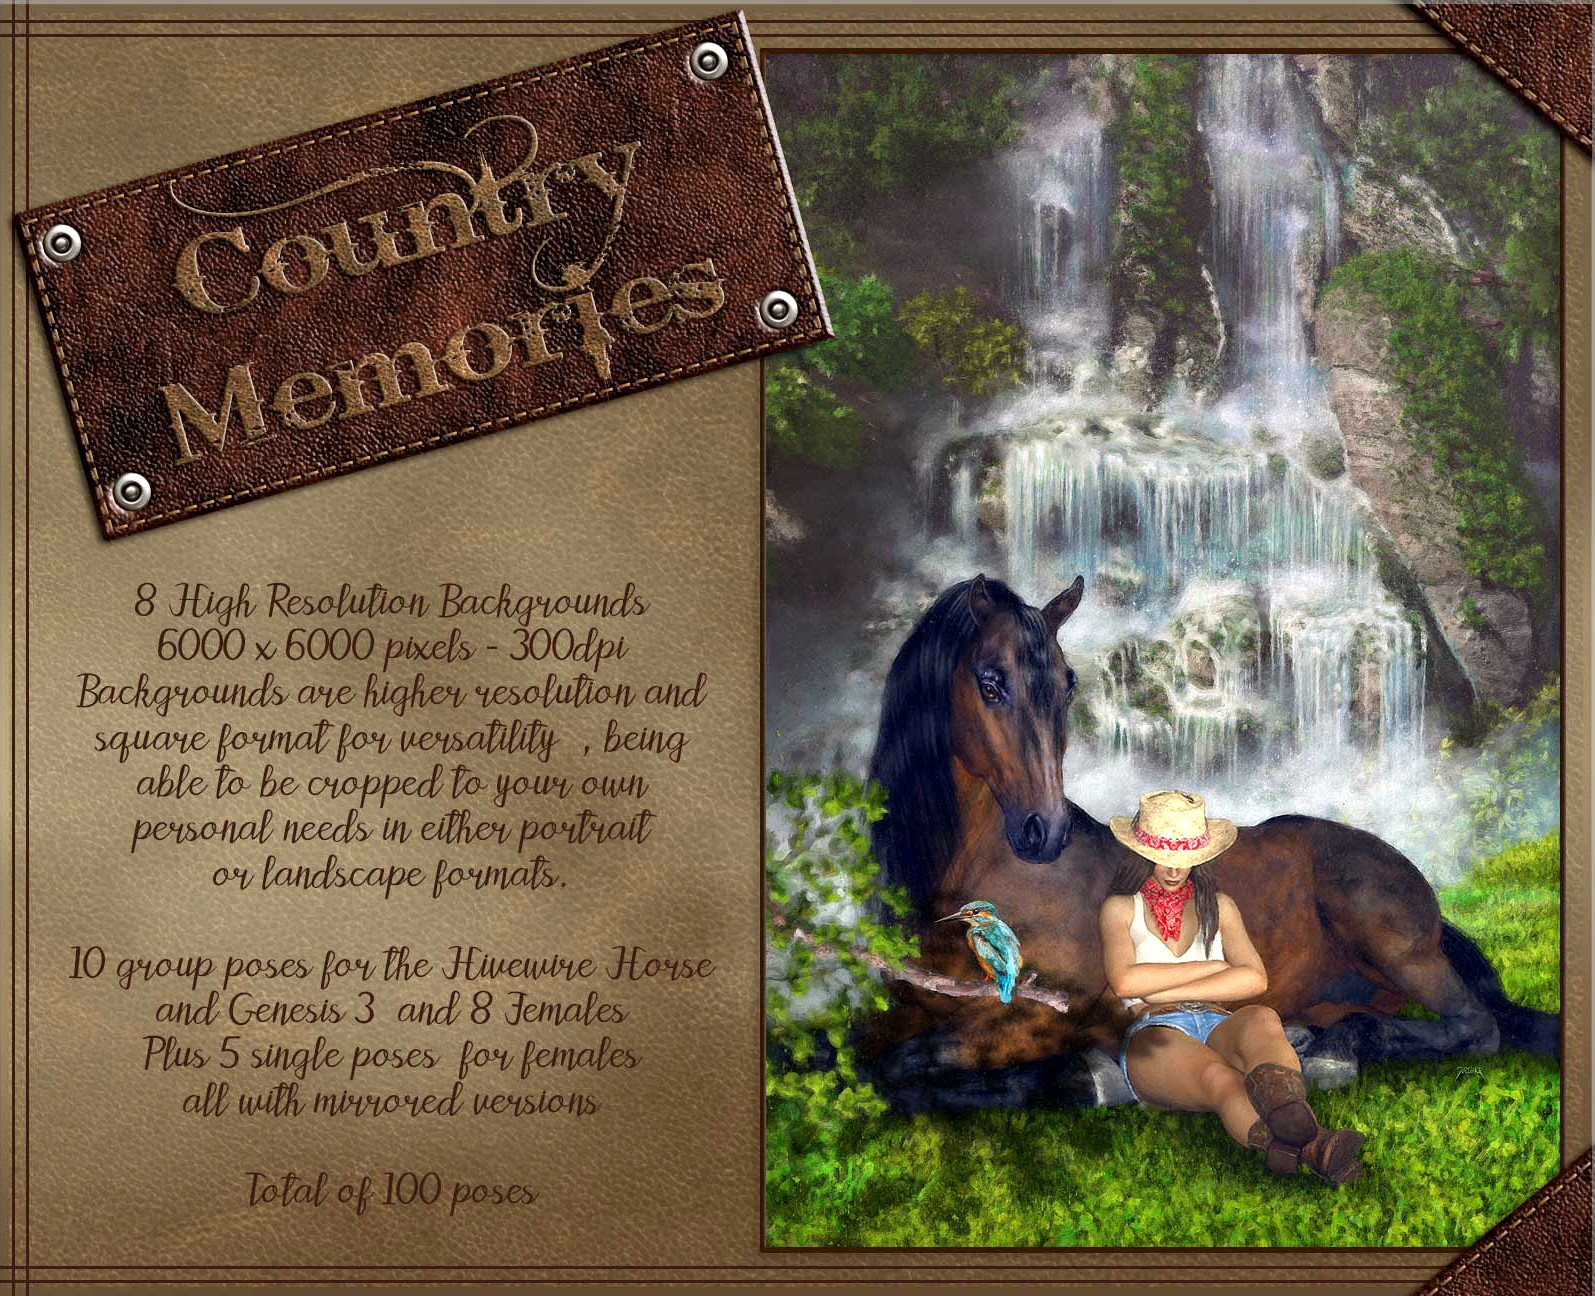 Country Memories - Backgrounds and poses for G3/8F and Hivewire Horse